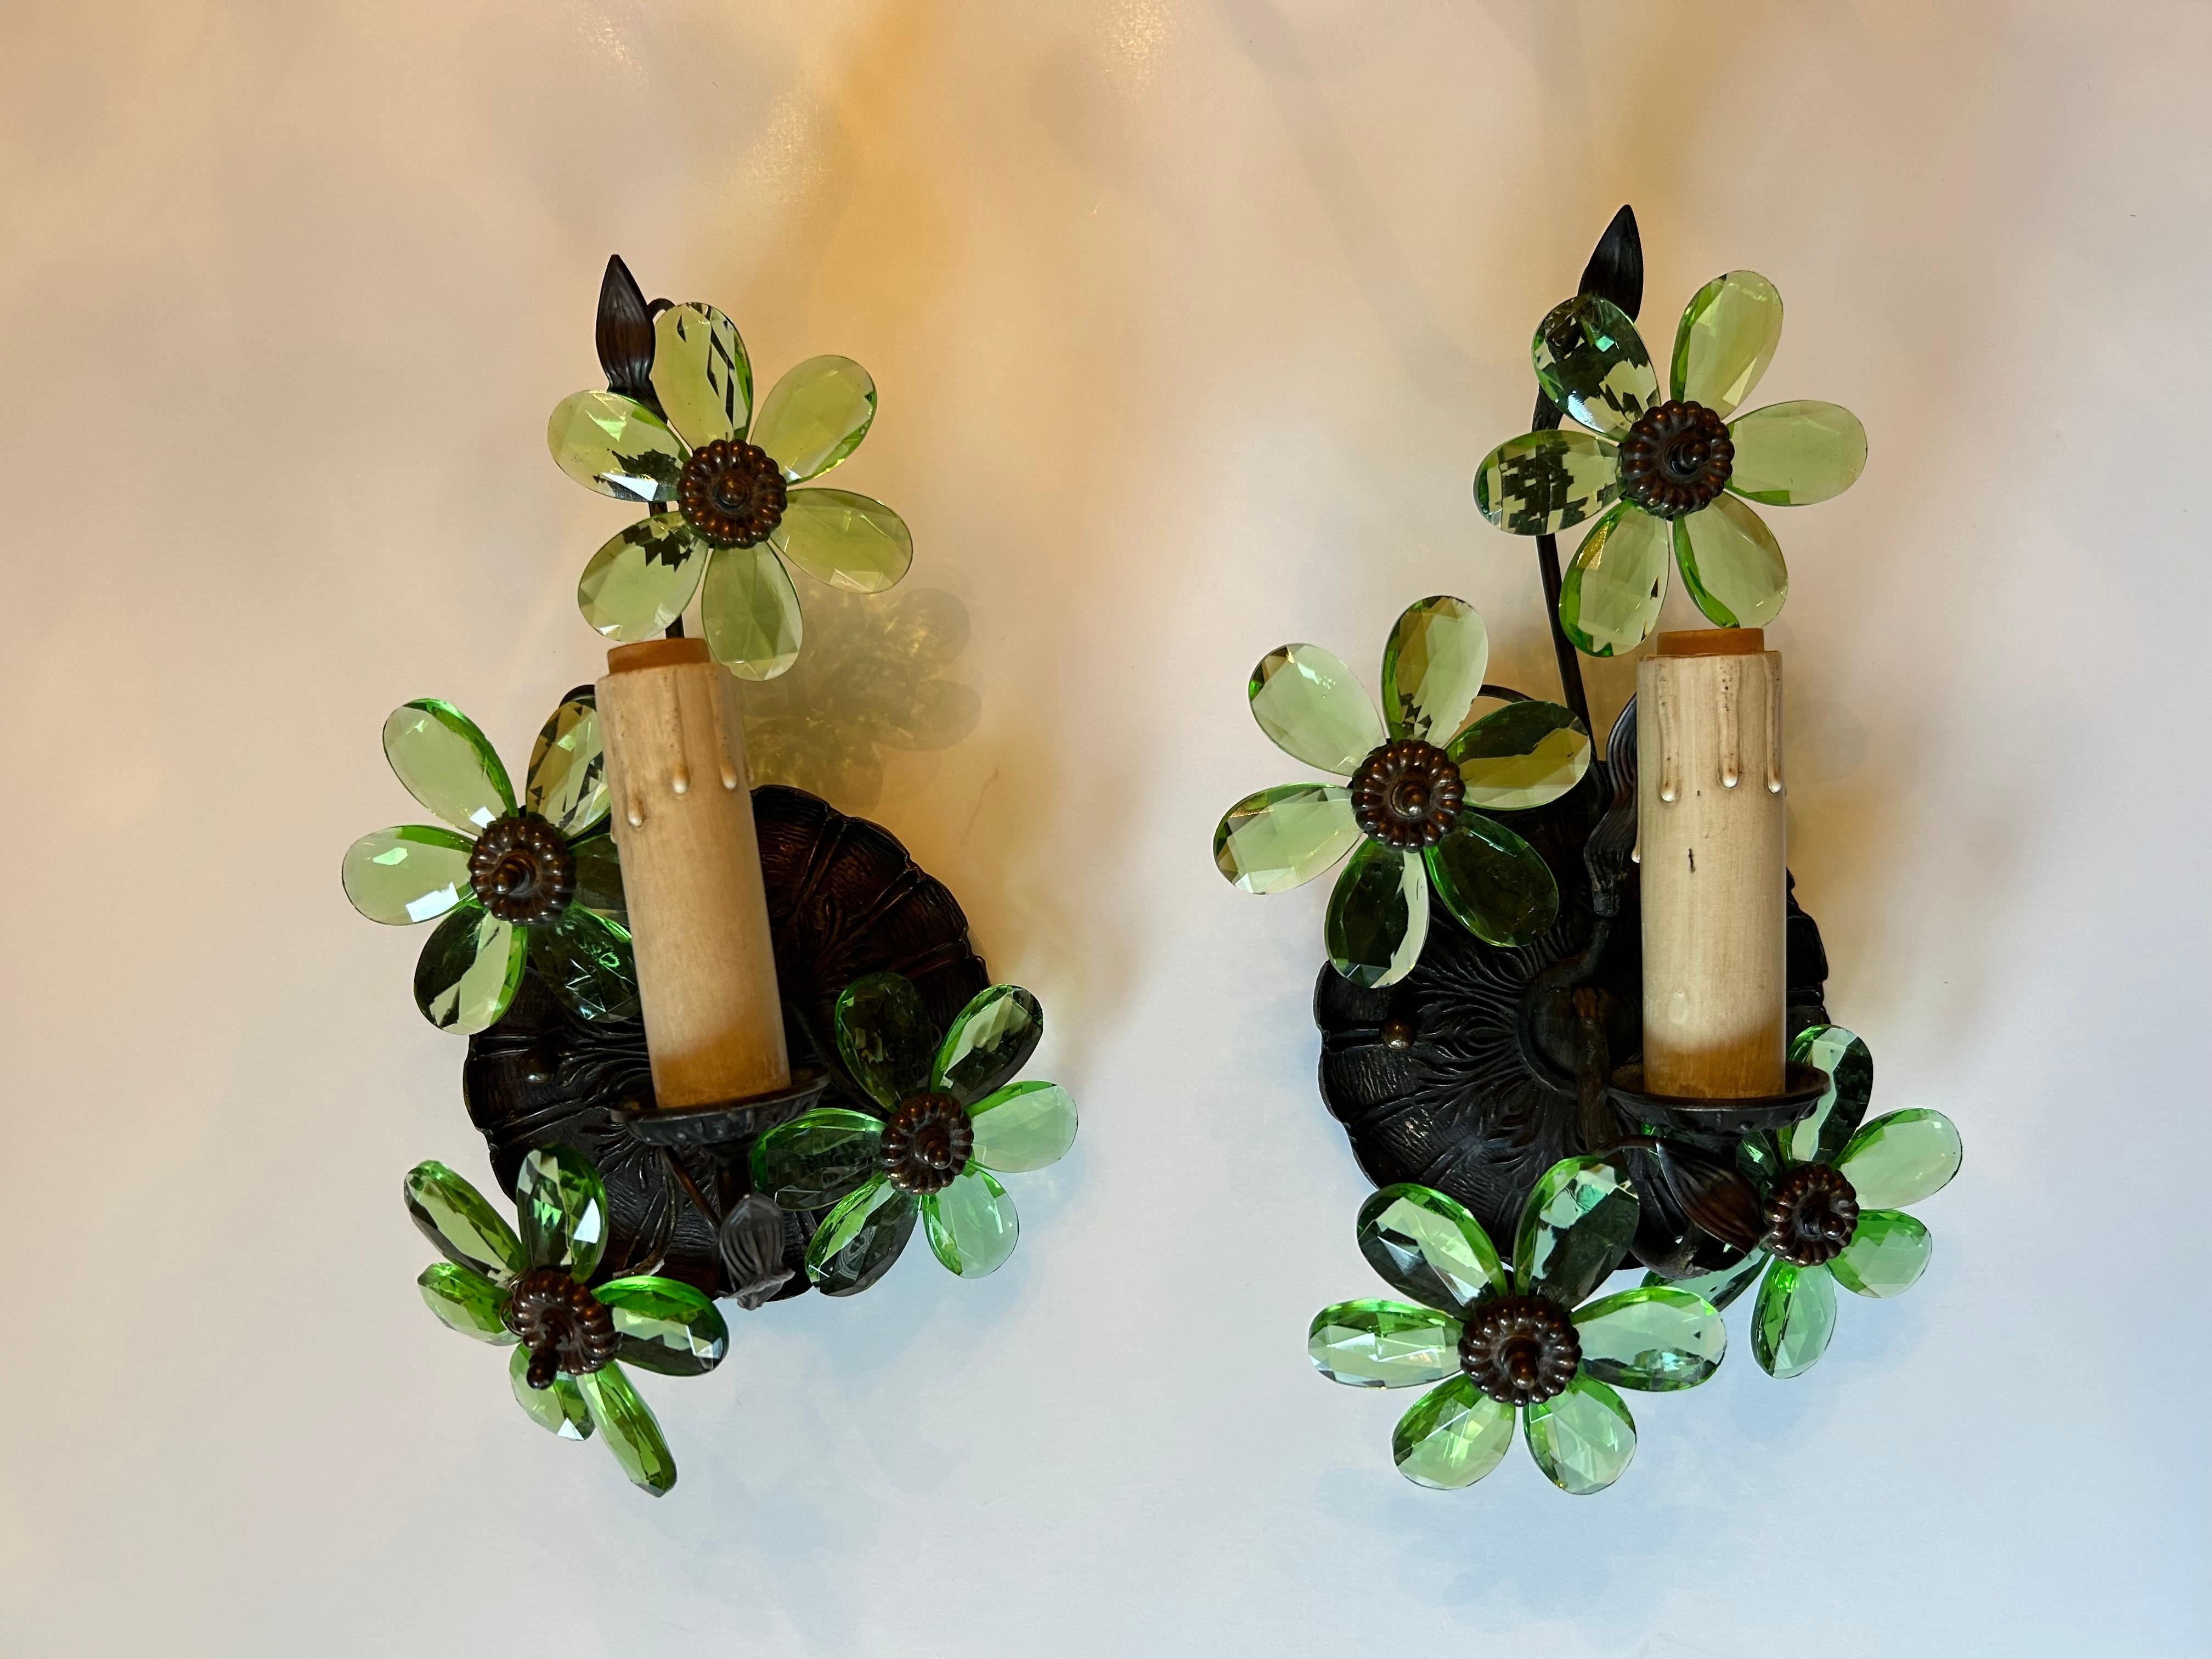 A wonderful pair of vintage Hollywood Regency style sconces made of metal and glass, showcasing sinuous leaves and bright green glass petals. In good condition, with all glass petals intact. Each sconce has one socket for a chandelier type